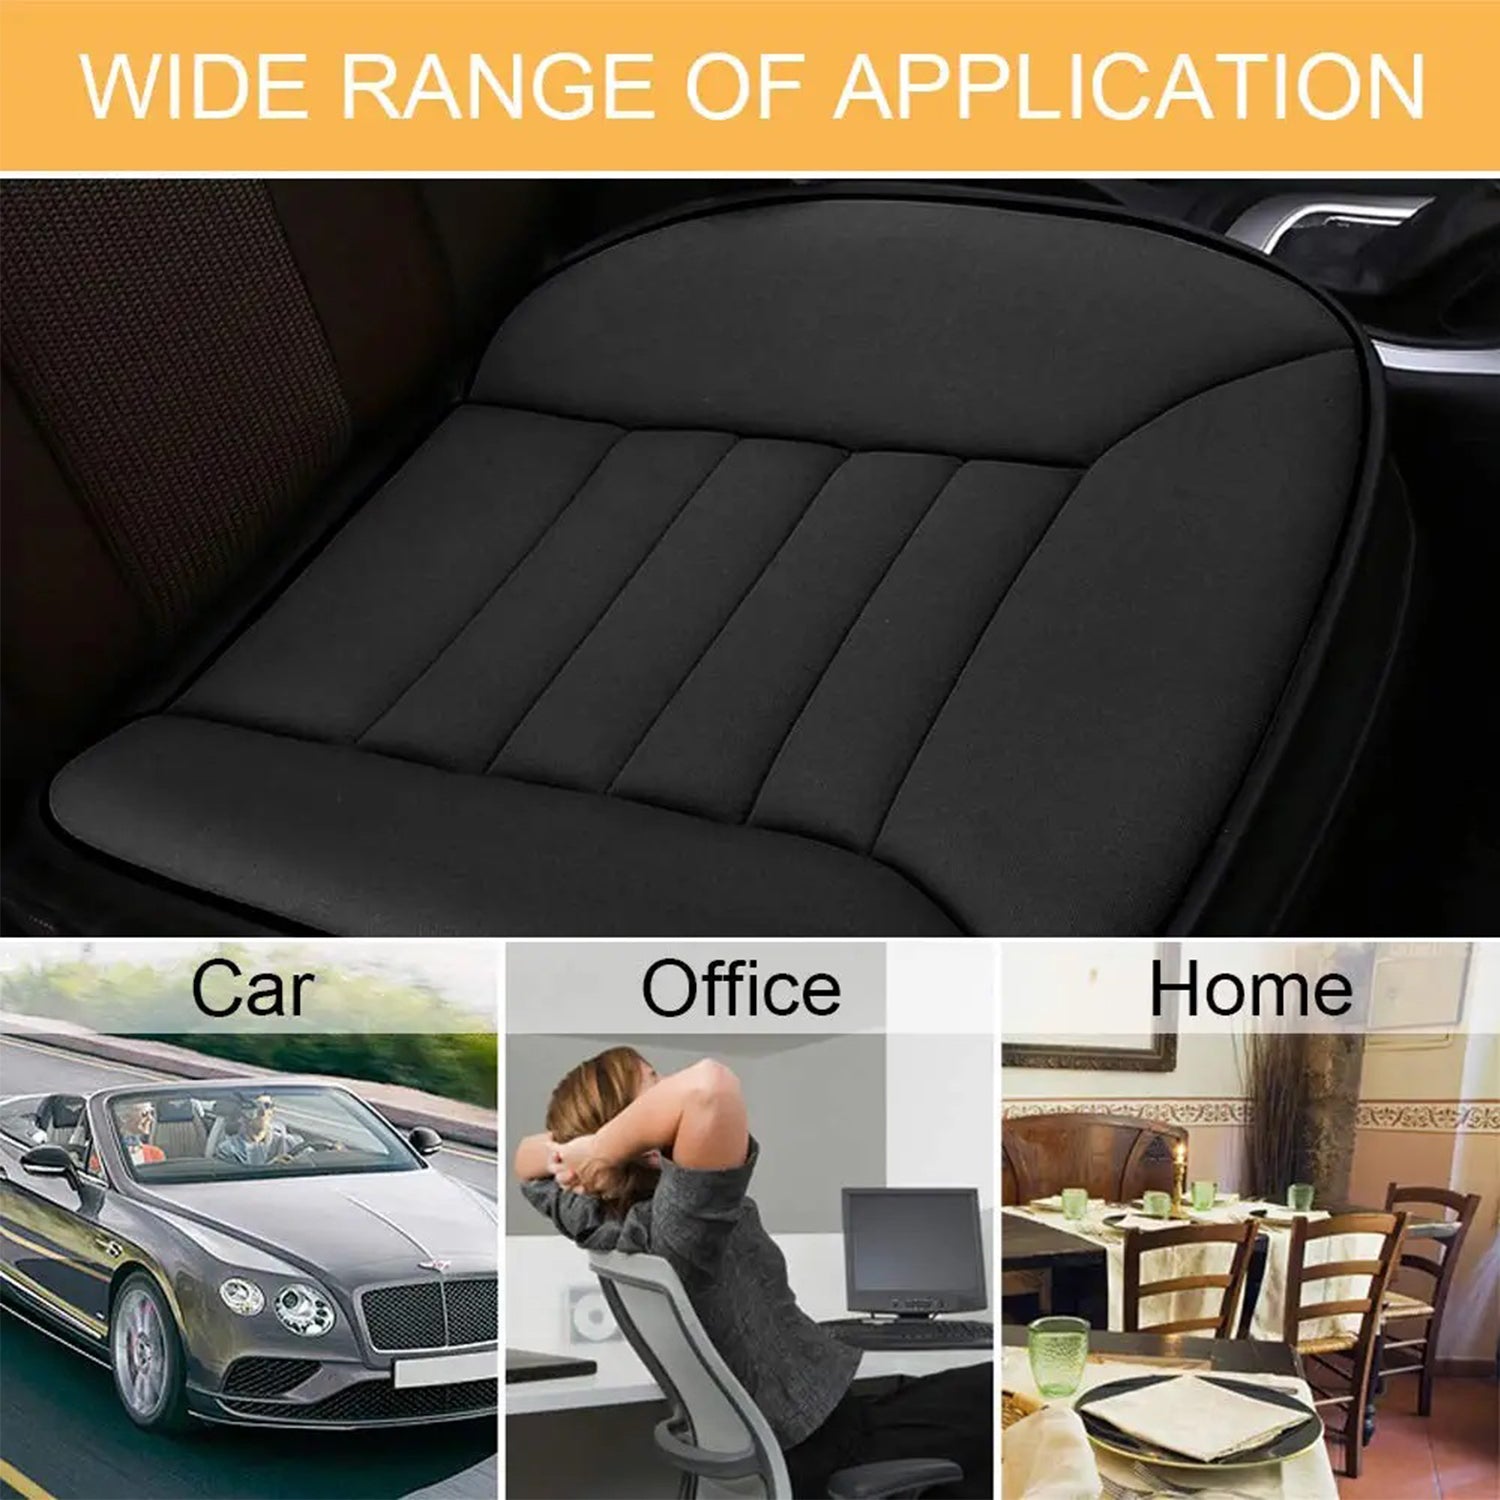 Car Seat Cushion with 1.2inch Comfort Memory Foam, Custom-Fit For Car, Seat Cushion for Car and Office Chair DLFJ247